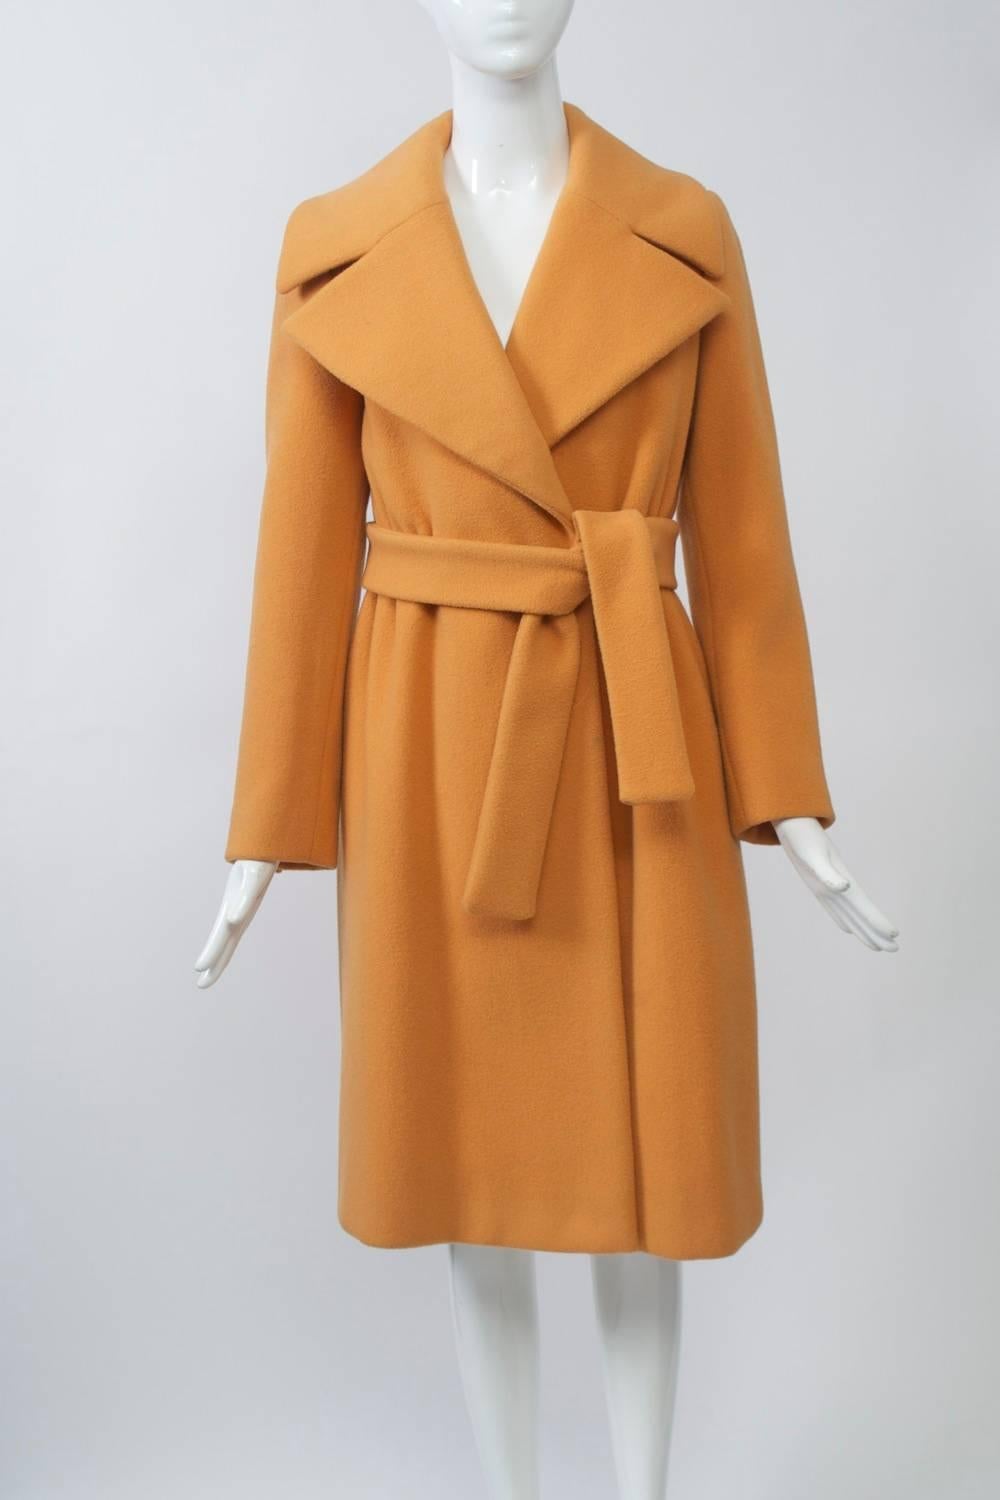 From John Anthony, whose luxurious, simply-constructed creations were among the best starting in the 1970s, this unusual and rich color of pumpkin melton wool, wrap-style coat features a wide notched collar and self tie belt. The waist is